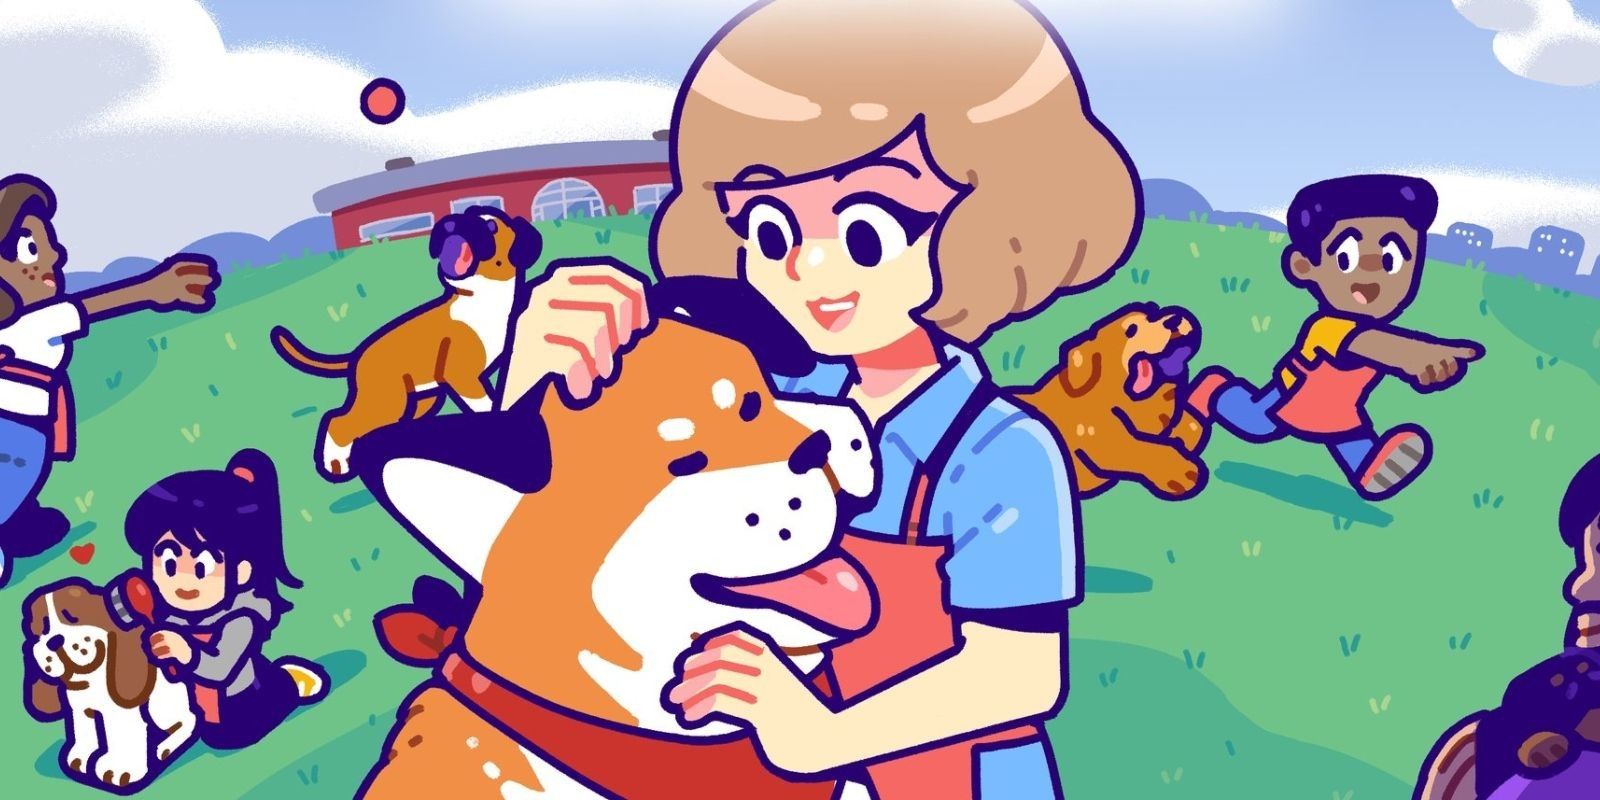 Game art of characters interacting with dogs. 